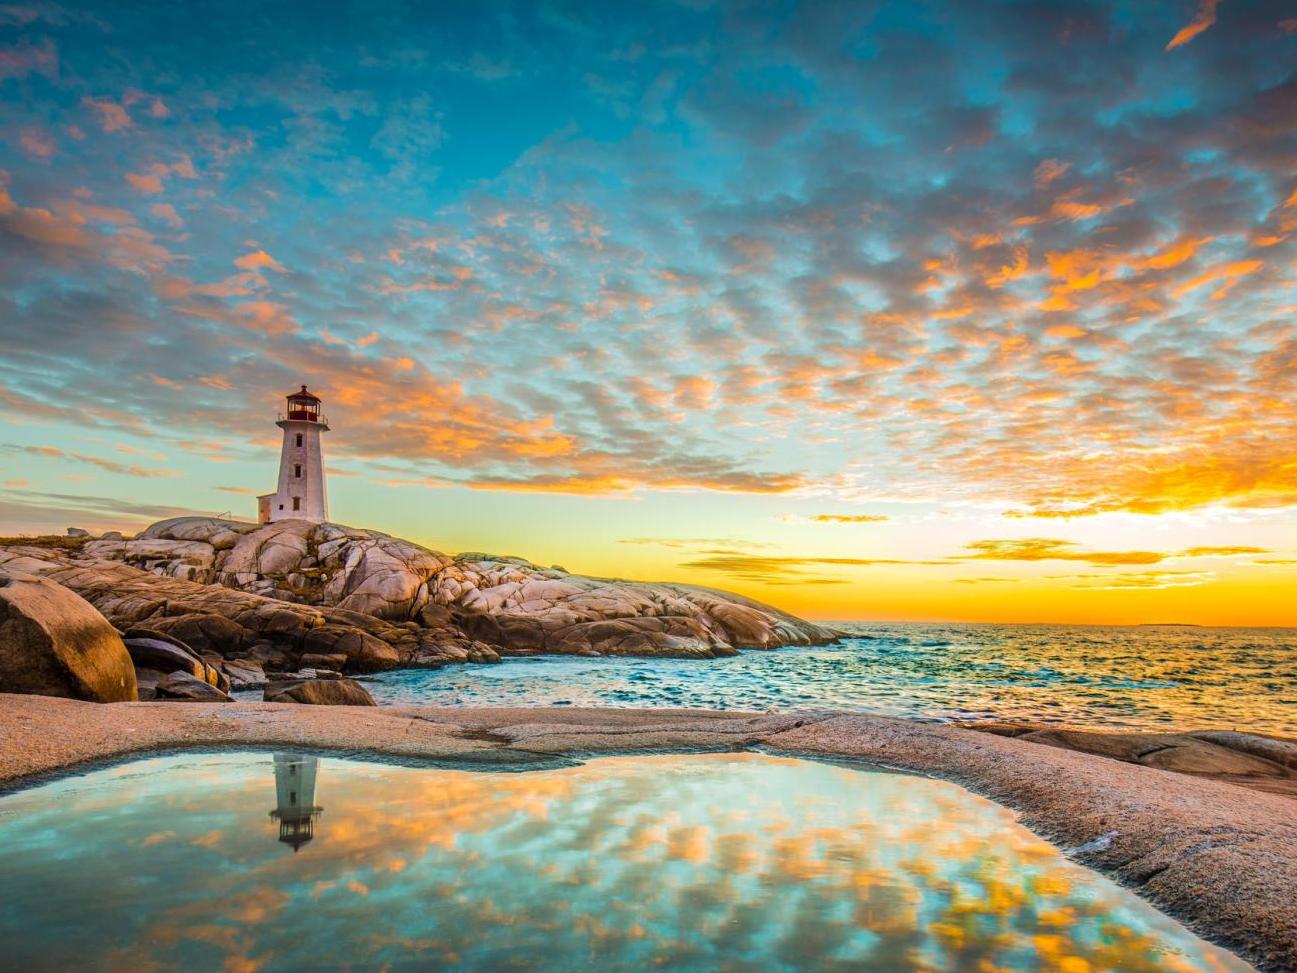 Peggy's Cove lighthouse at sunset